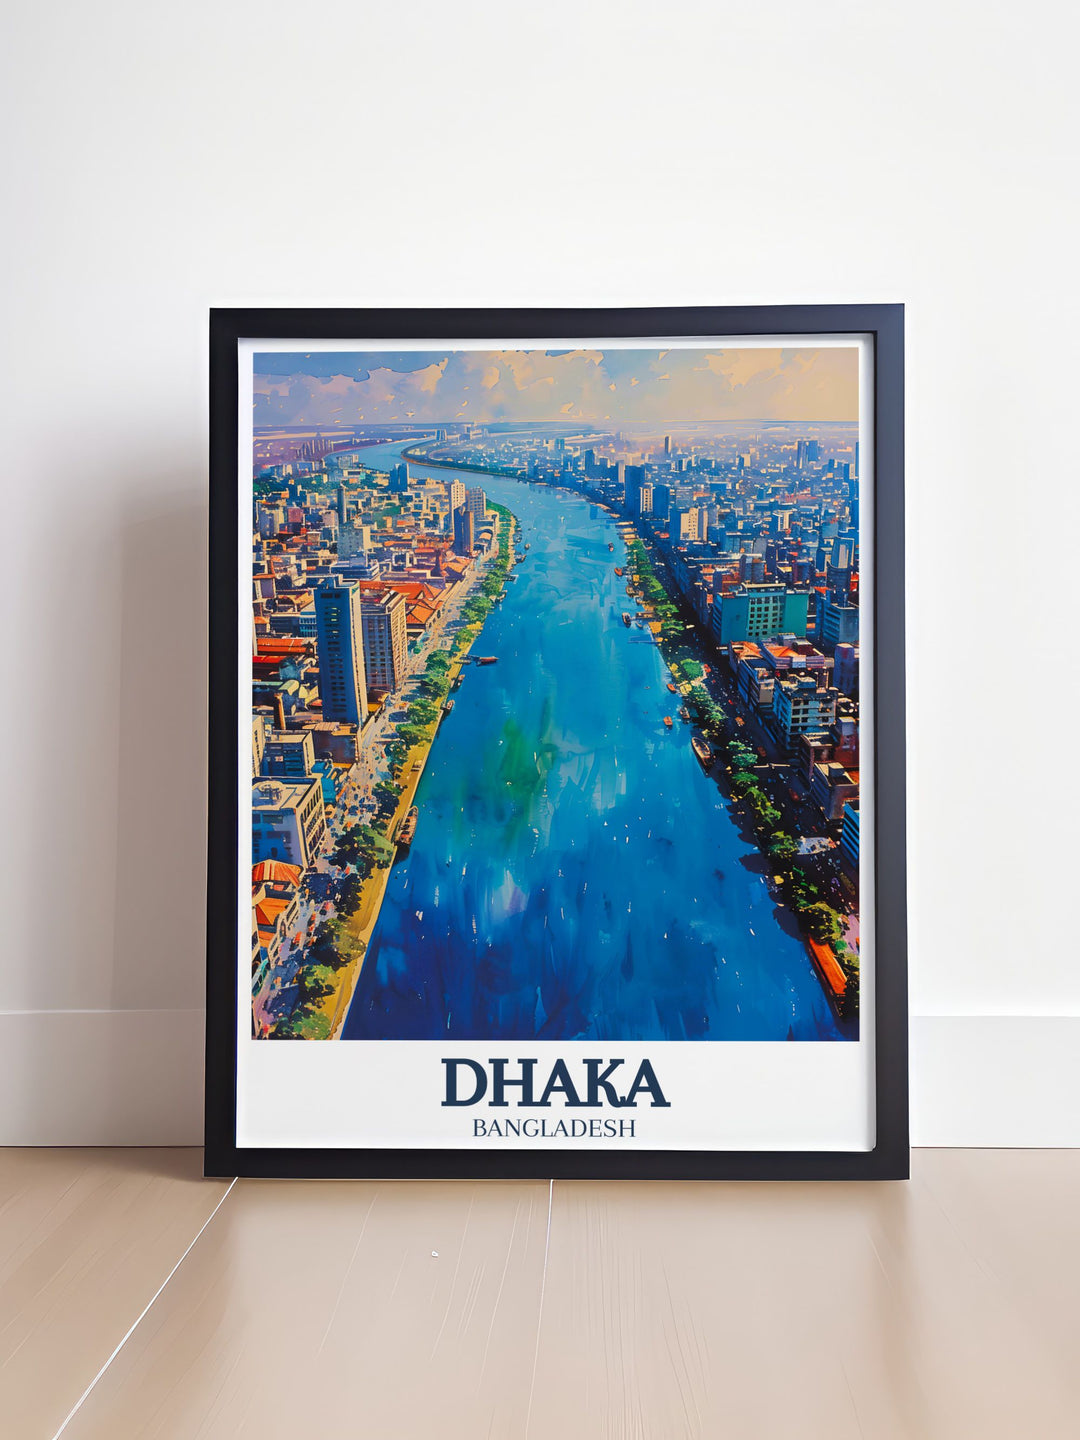 Stunning Buriganga river Dhaka wall art featuring fine line prints and colorful designs capturing the essence of Bangladesh perfect for home decor and gifts.